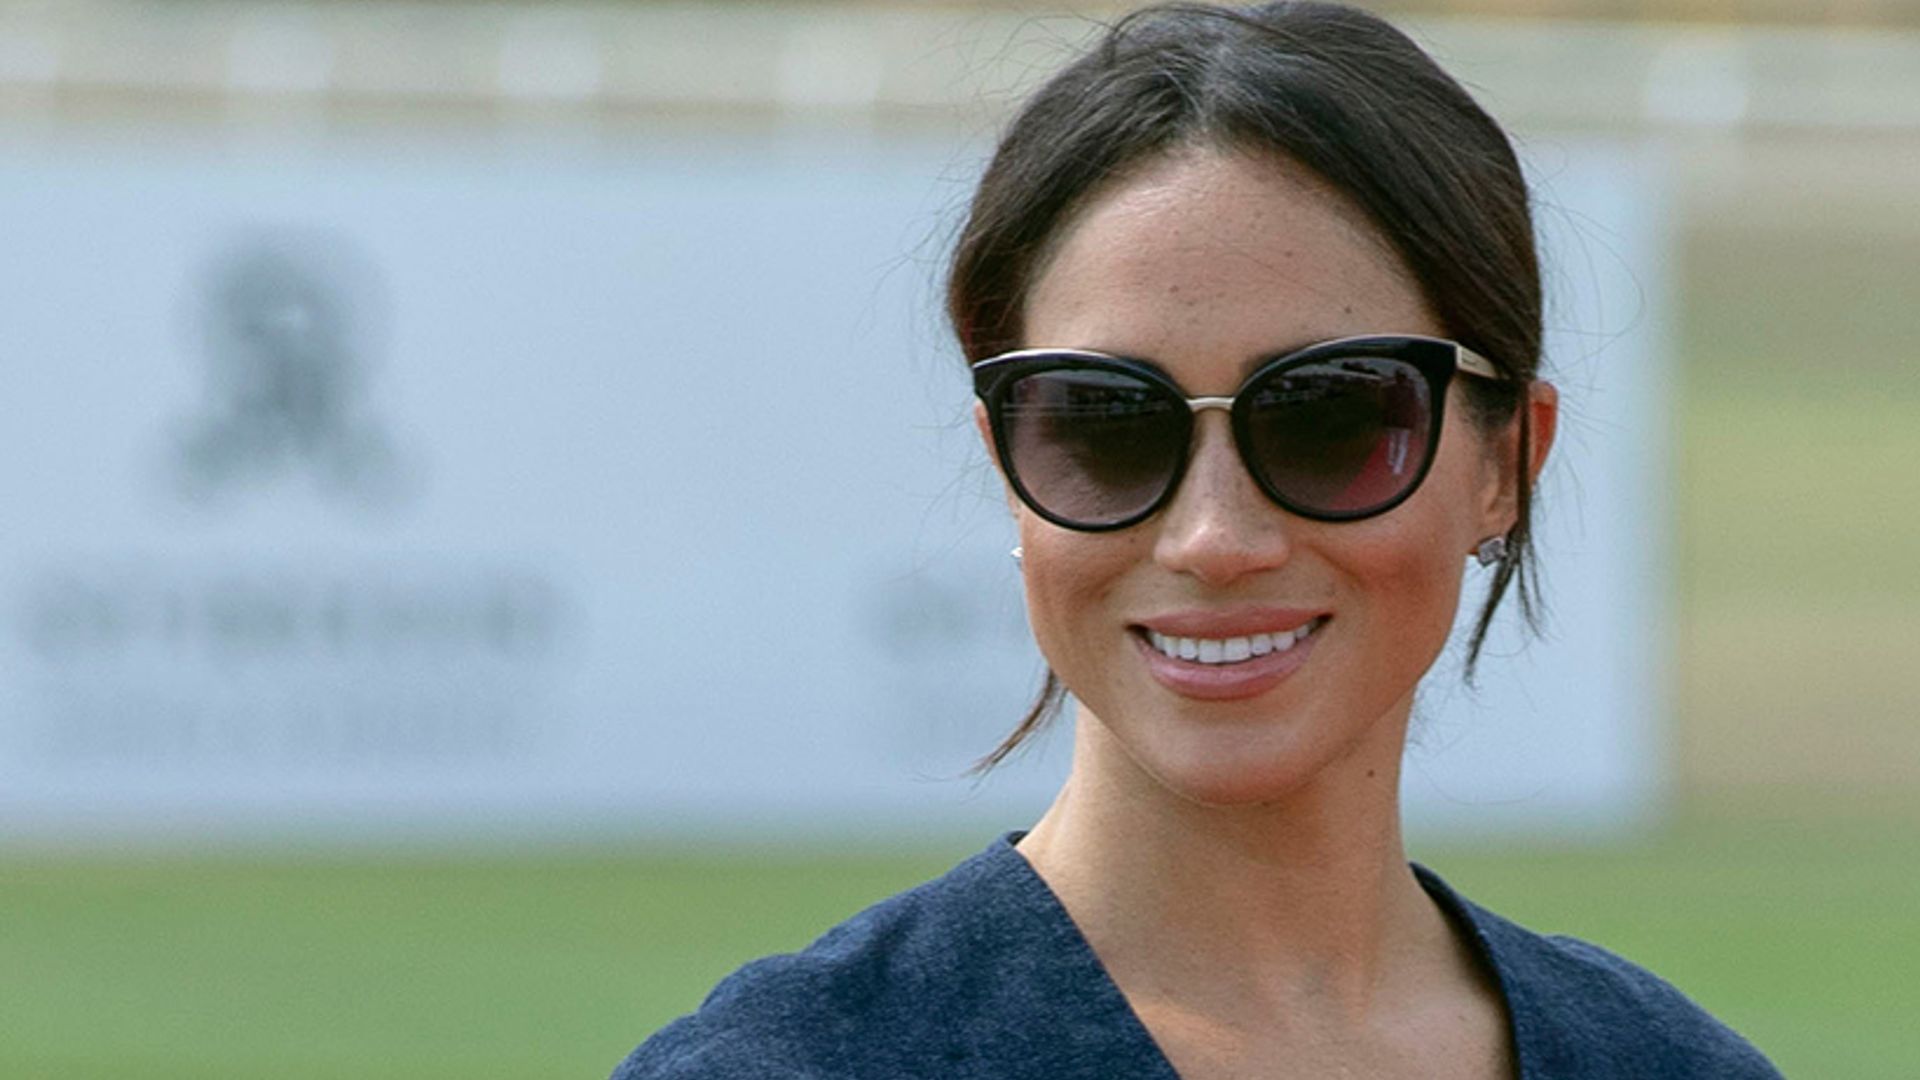 Meghan Markle just wore the same £27 clutch bag as Pippa Middleton | HELLO!